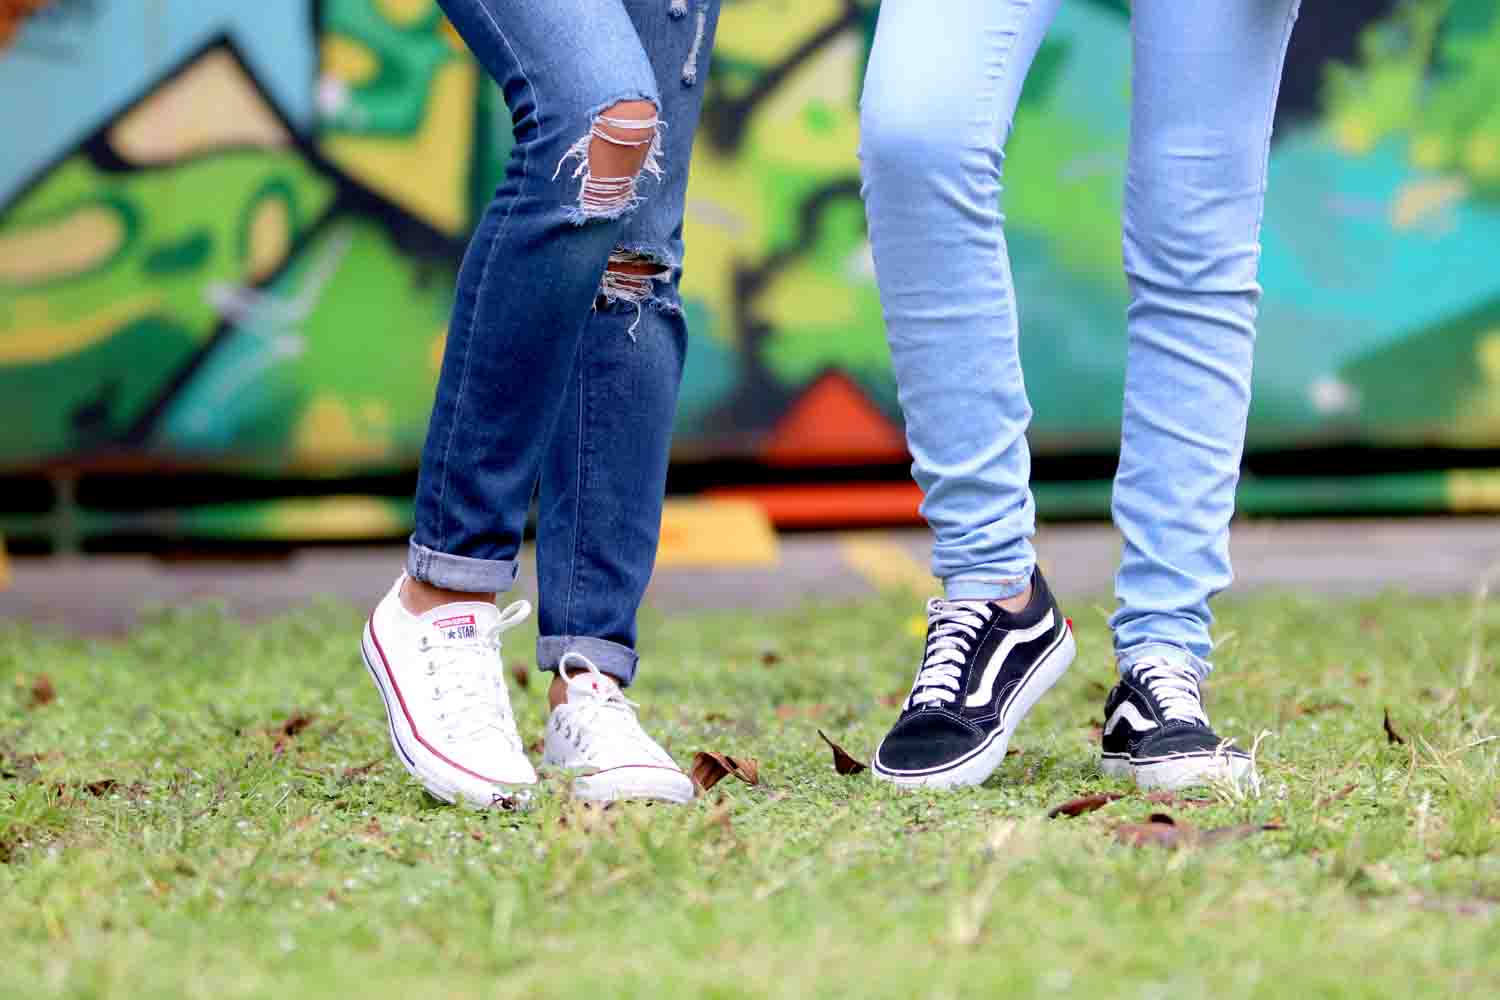 Two people wearing jeans and sneakers